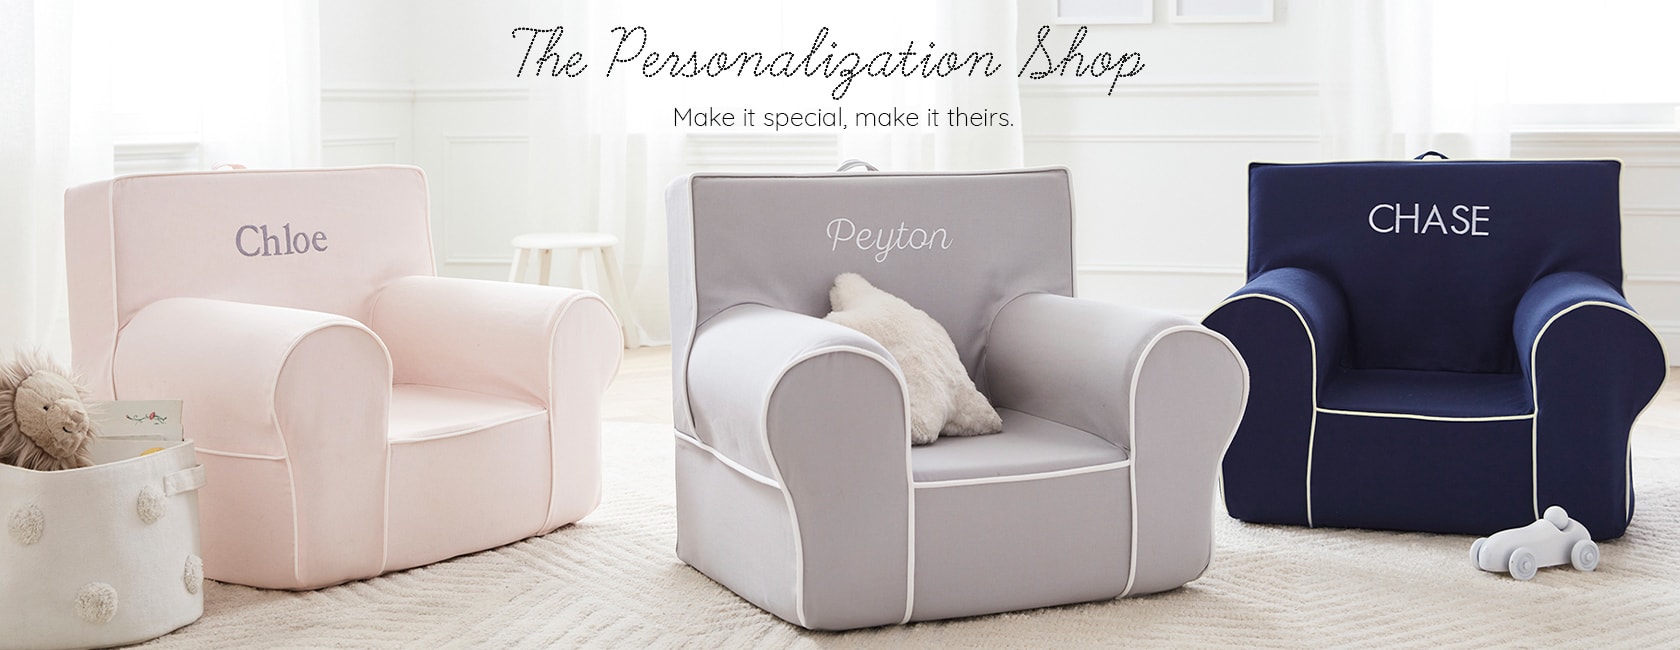 The Personalization Shop